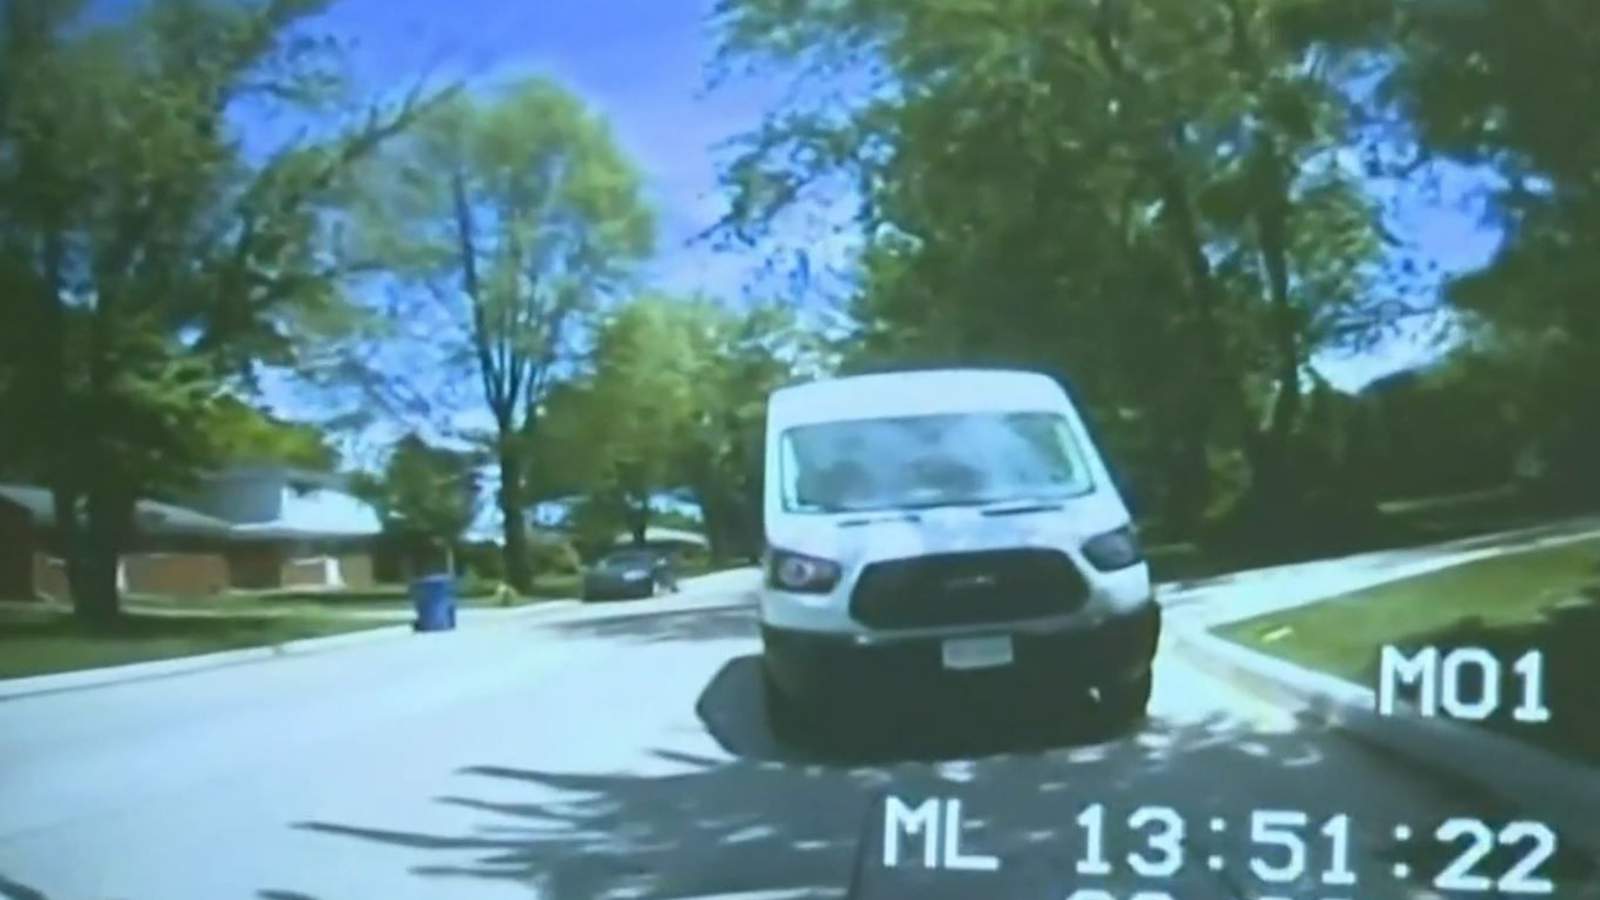 Warren police release dashcam video of altercation between officer and Amazon driver